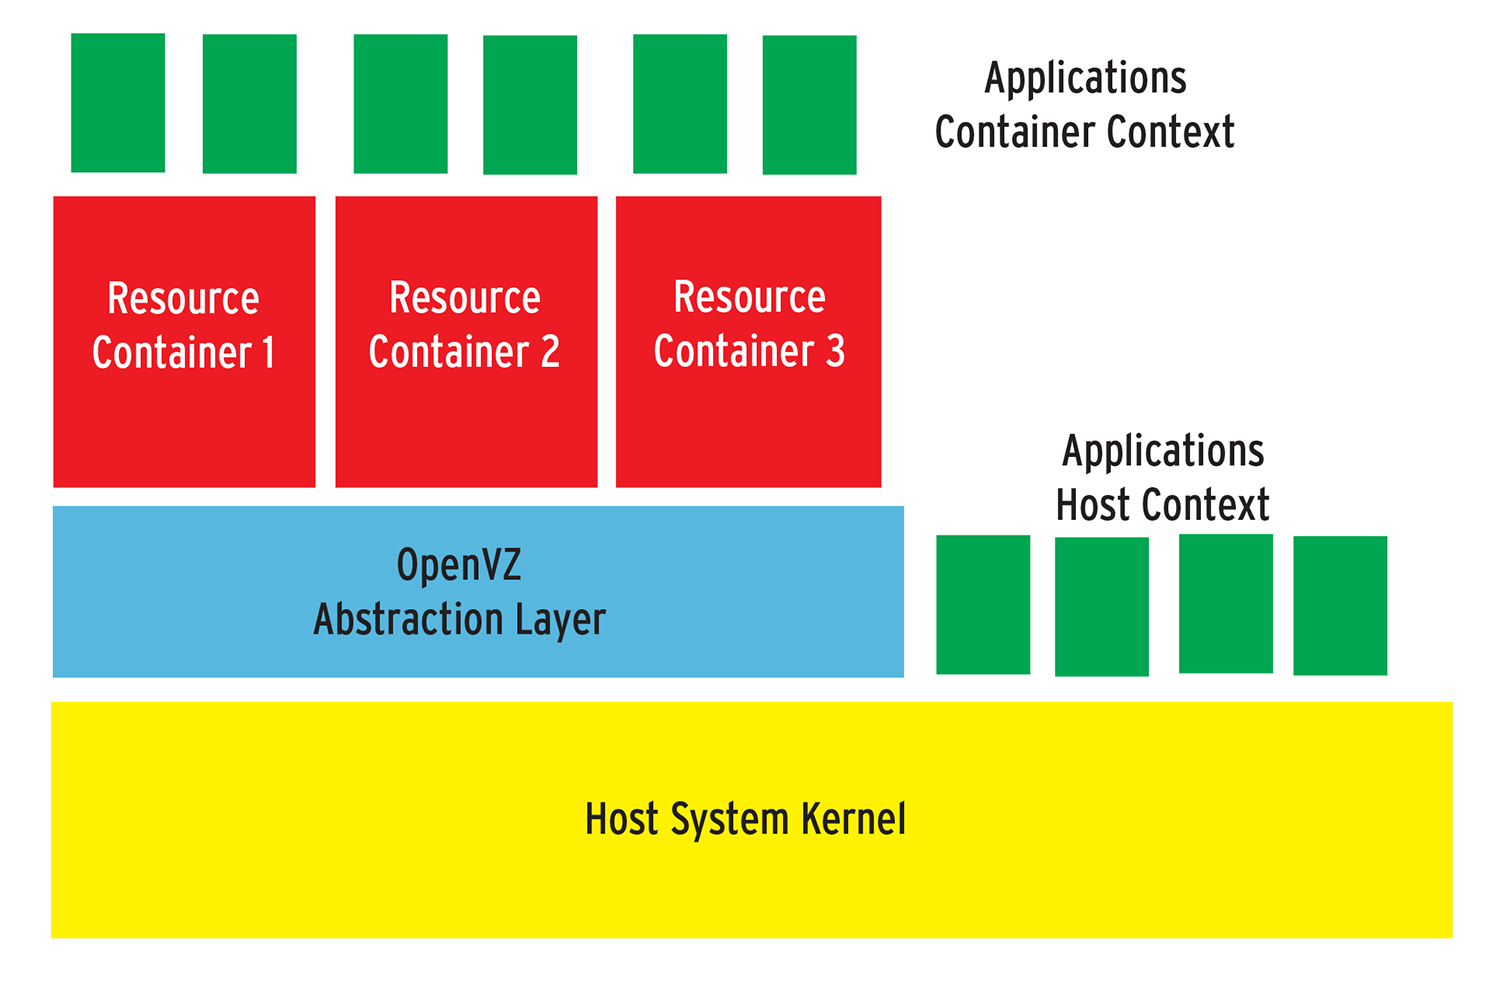 In virtualization based on resource containers, the host and guest use the same kernel; therefore, they must be of the same type. This means that a Linux host can only support Linux guests. 